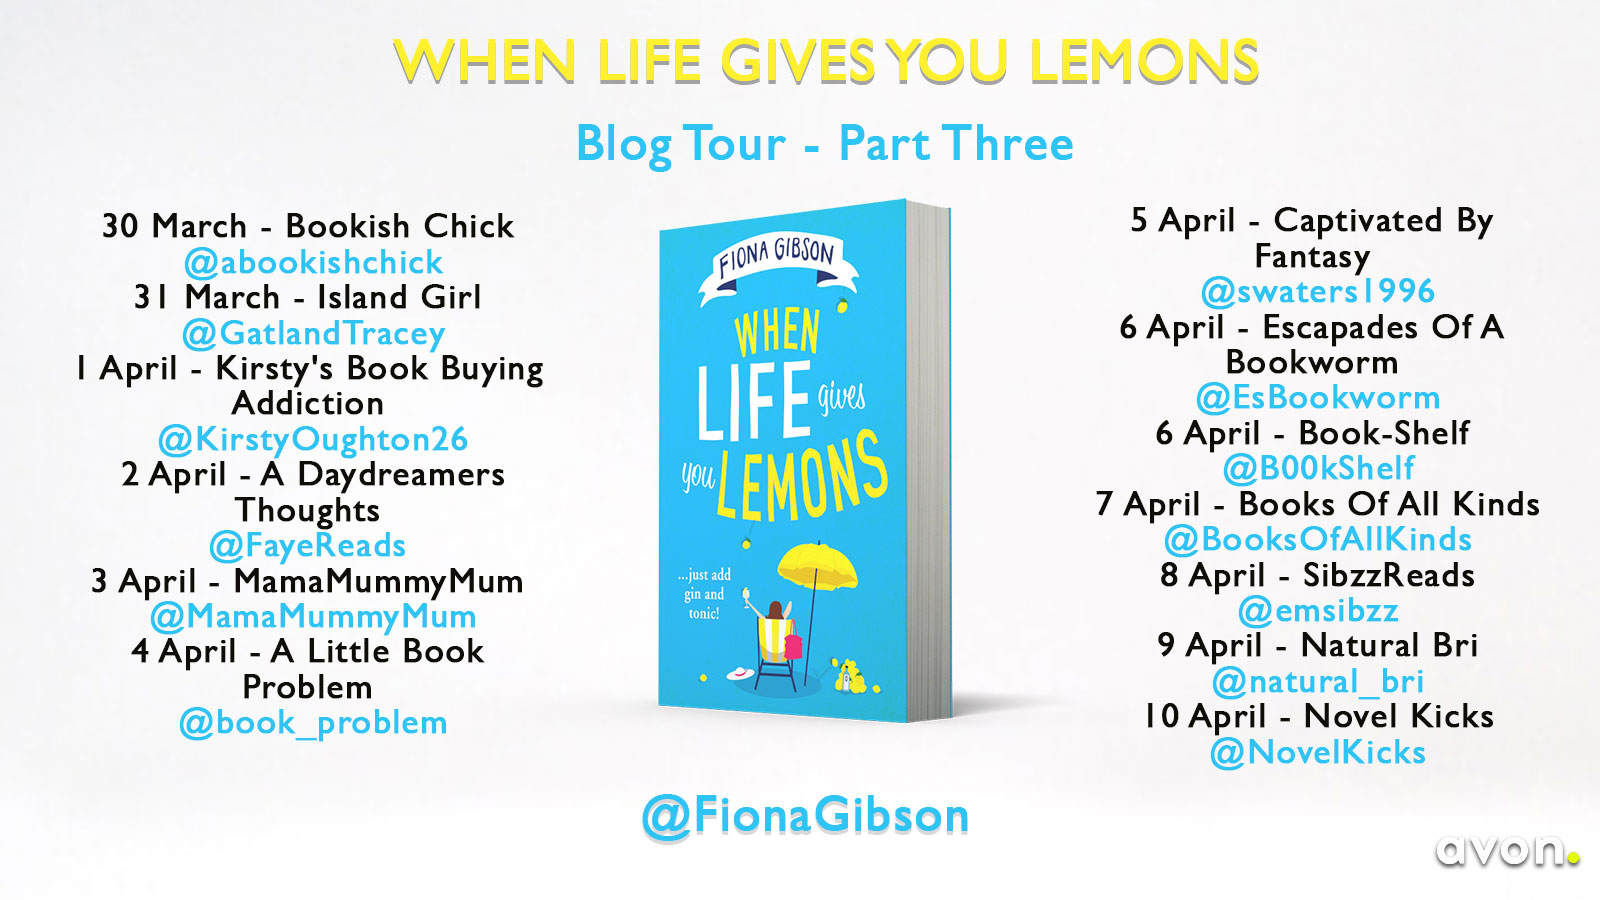 When Life Gives You Lemons by Fiona Gibson bLOG TOUR